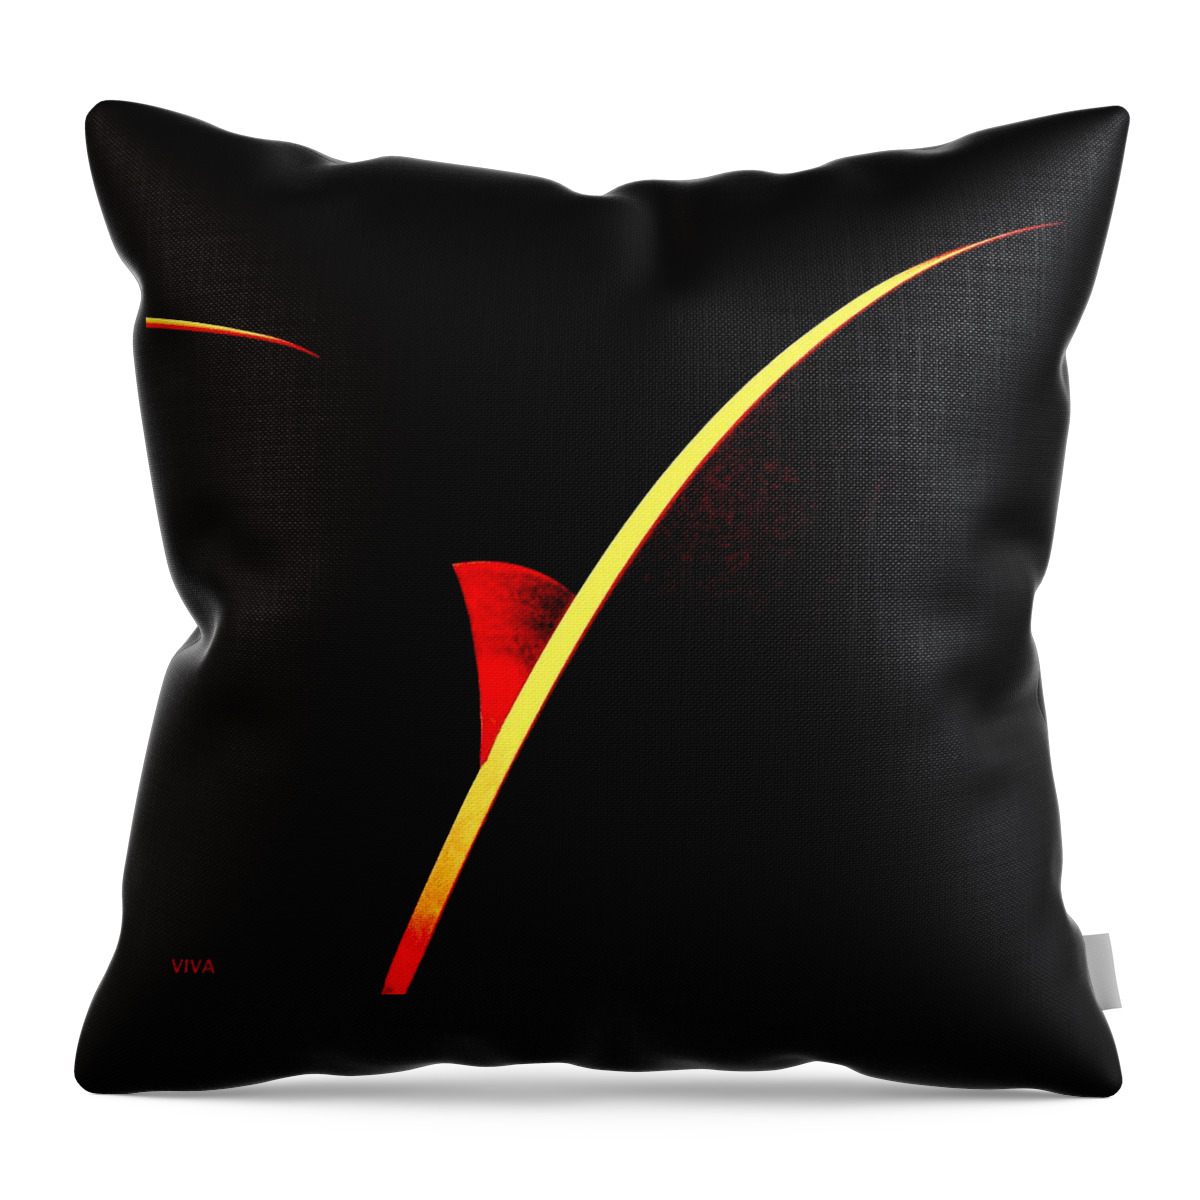 Blood Moon Throw Pillow featuring the digital art Bloodmoonrise Abstract by VIVA Anderson